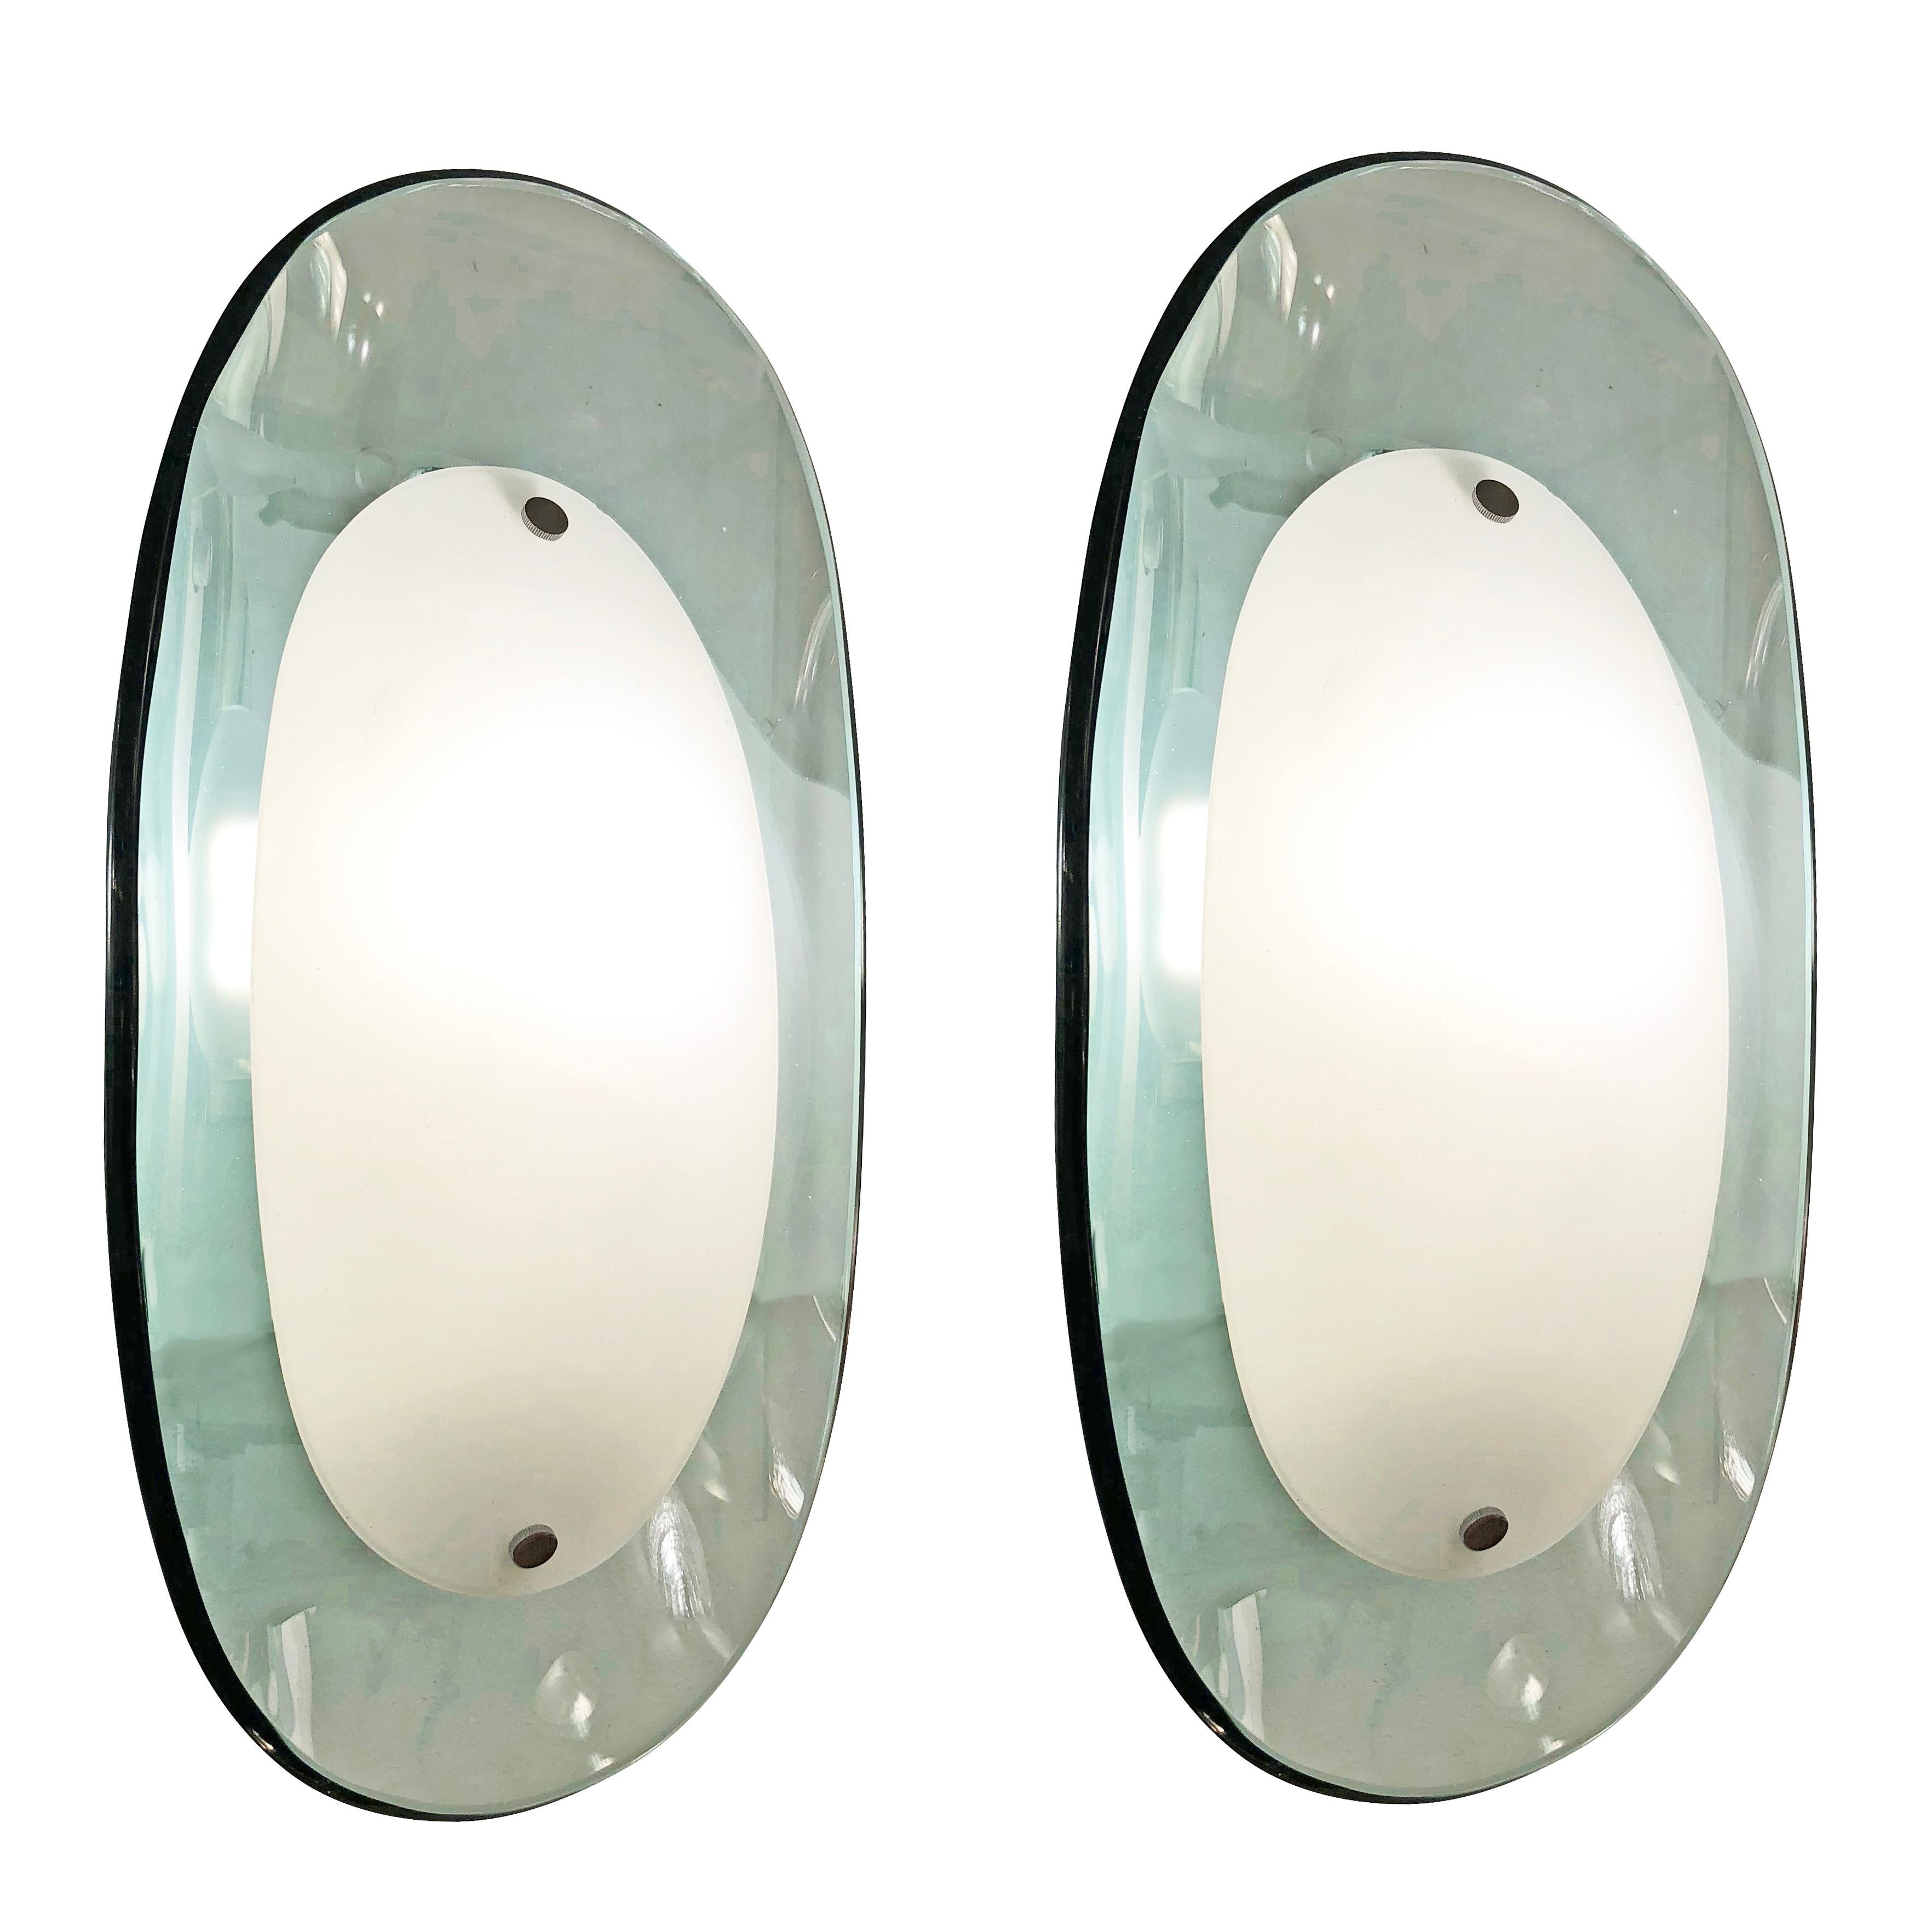 Pair of elegant midcentury wall lights by Cristal Art each featuring two racetrack glasses; a light blue concave one on the back and white frosted convex one on the front. Hardware is nickel and lacquered white. Each holds one candelabra